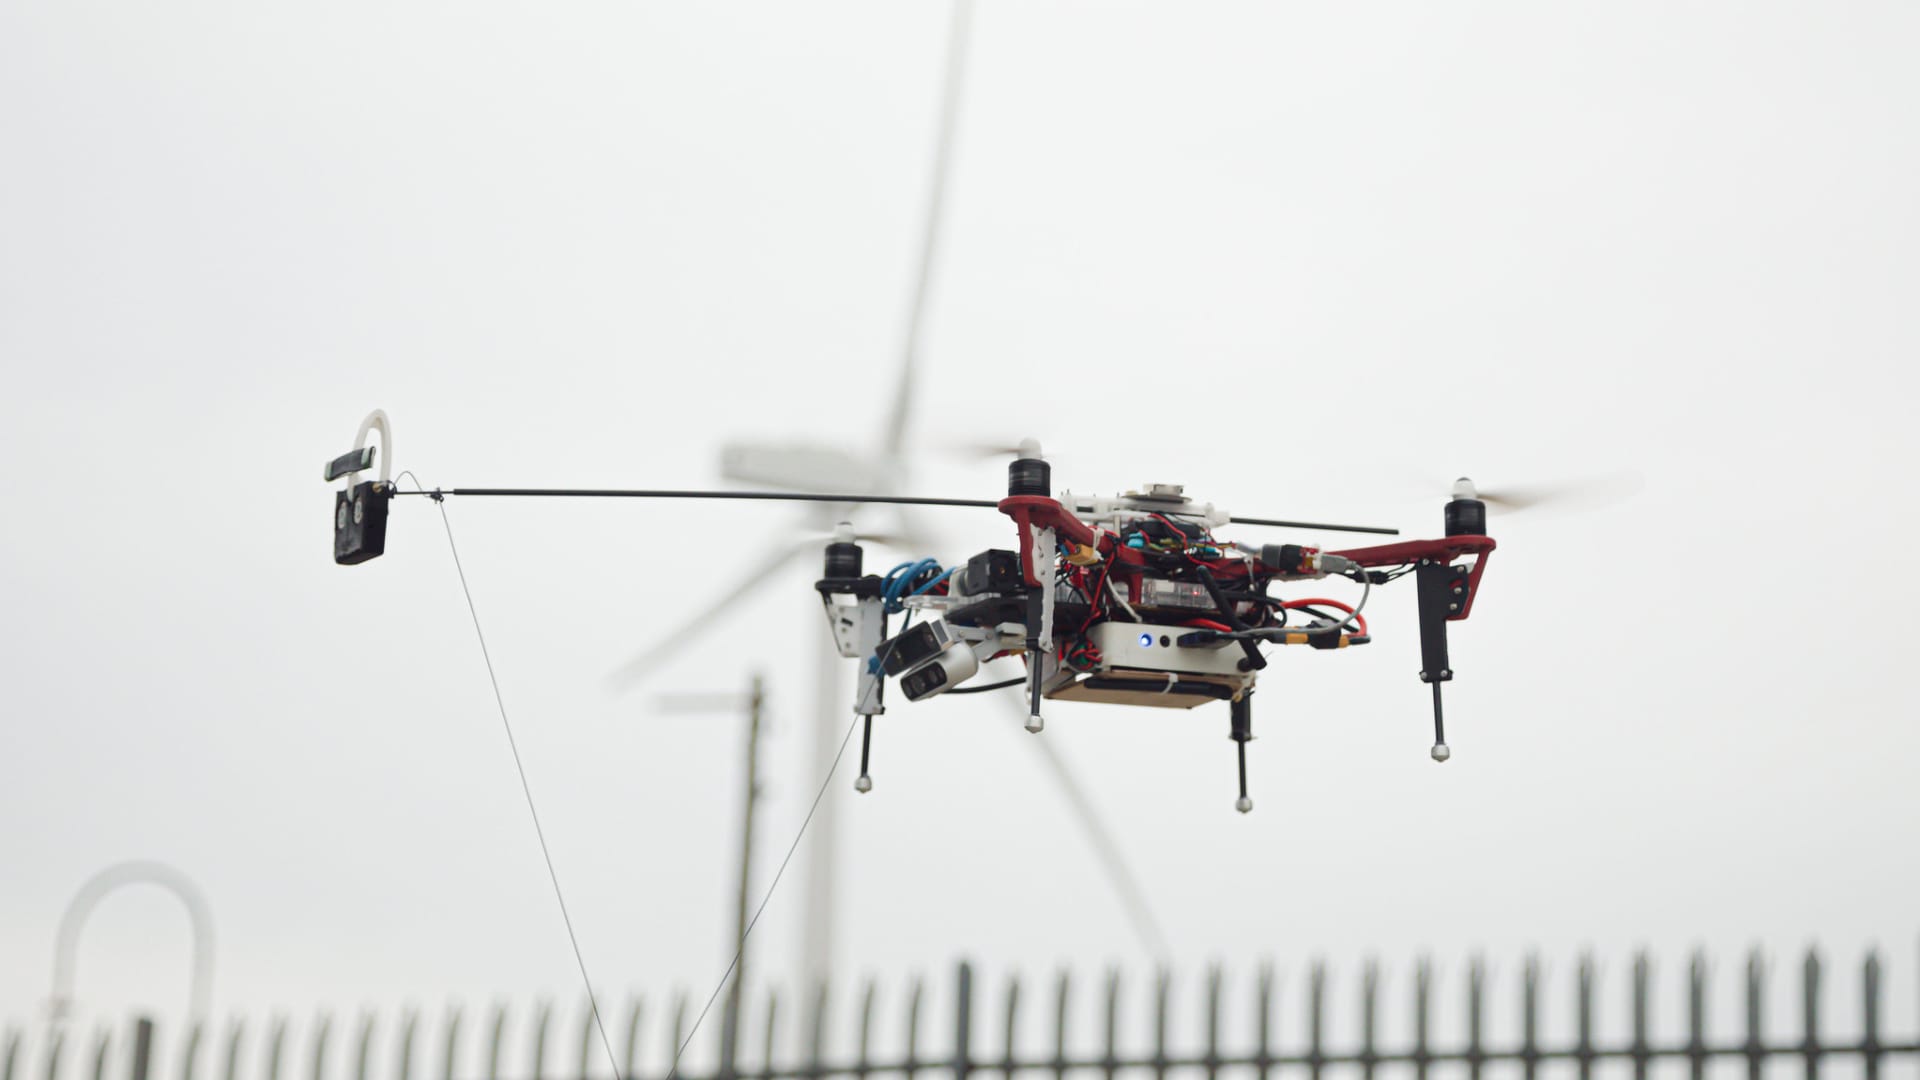 Researchers develop 'fully autonomous' drones that can inspect and fix wind turbines